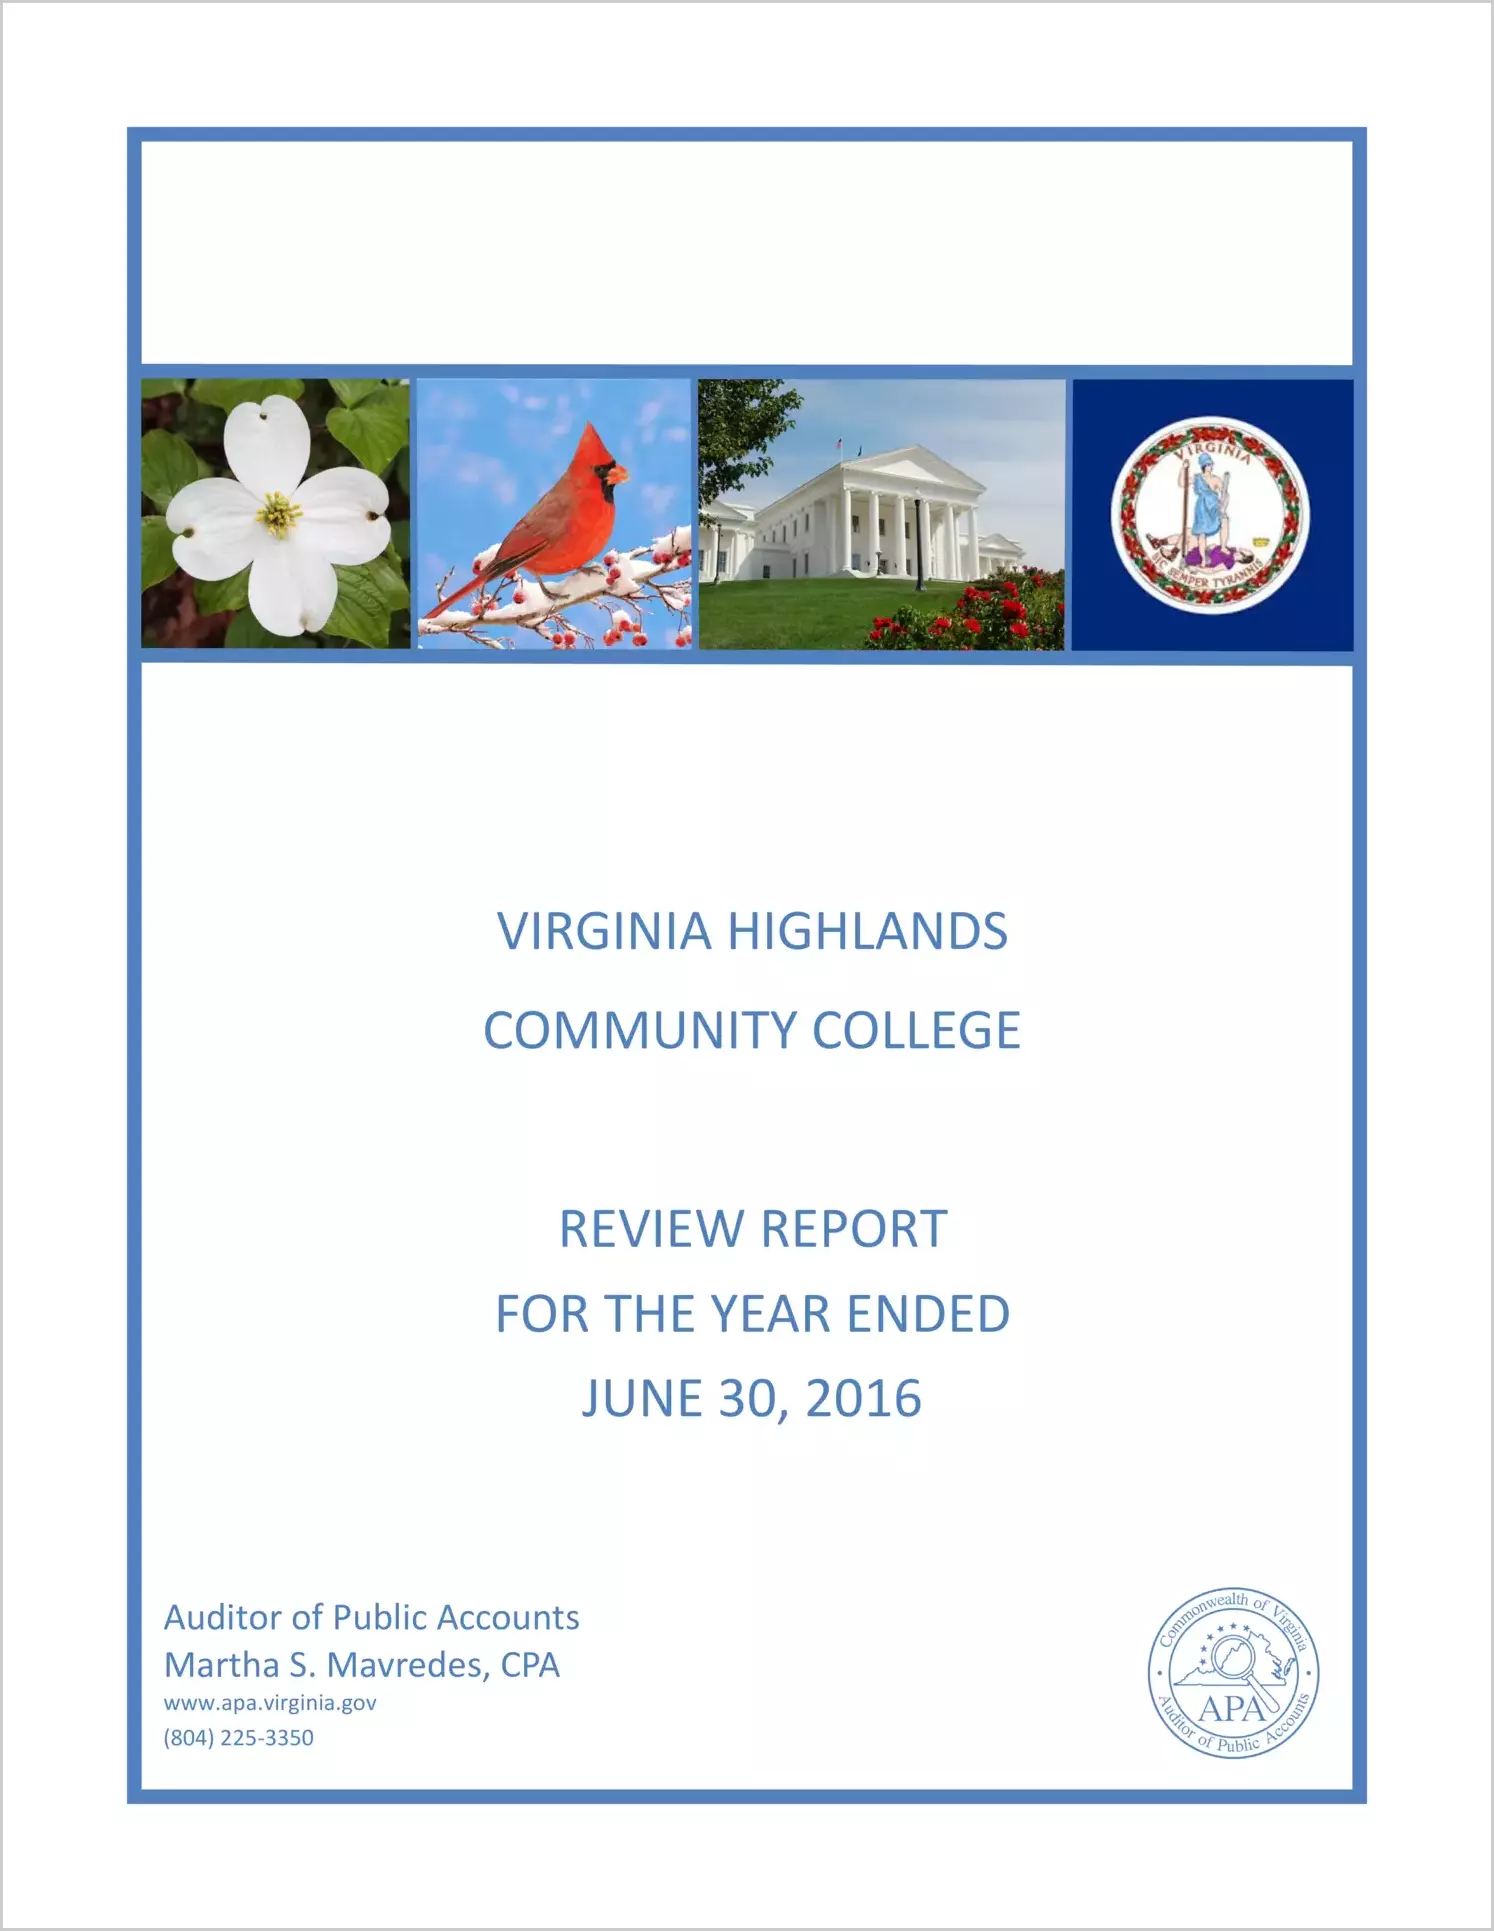 Virginia Highlands Community College Review Report for the year ended June 30, 2016